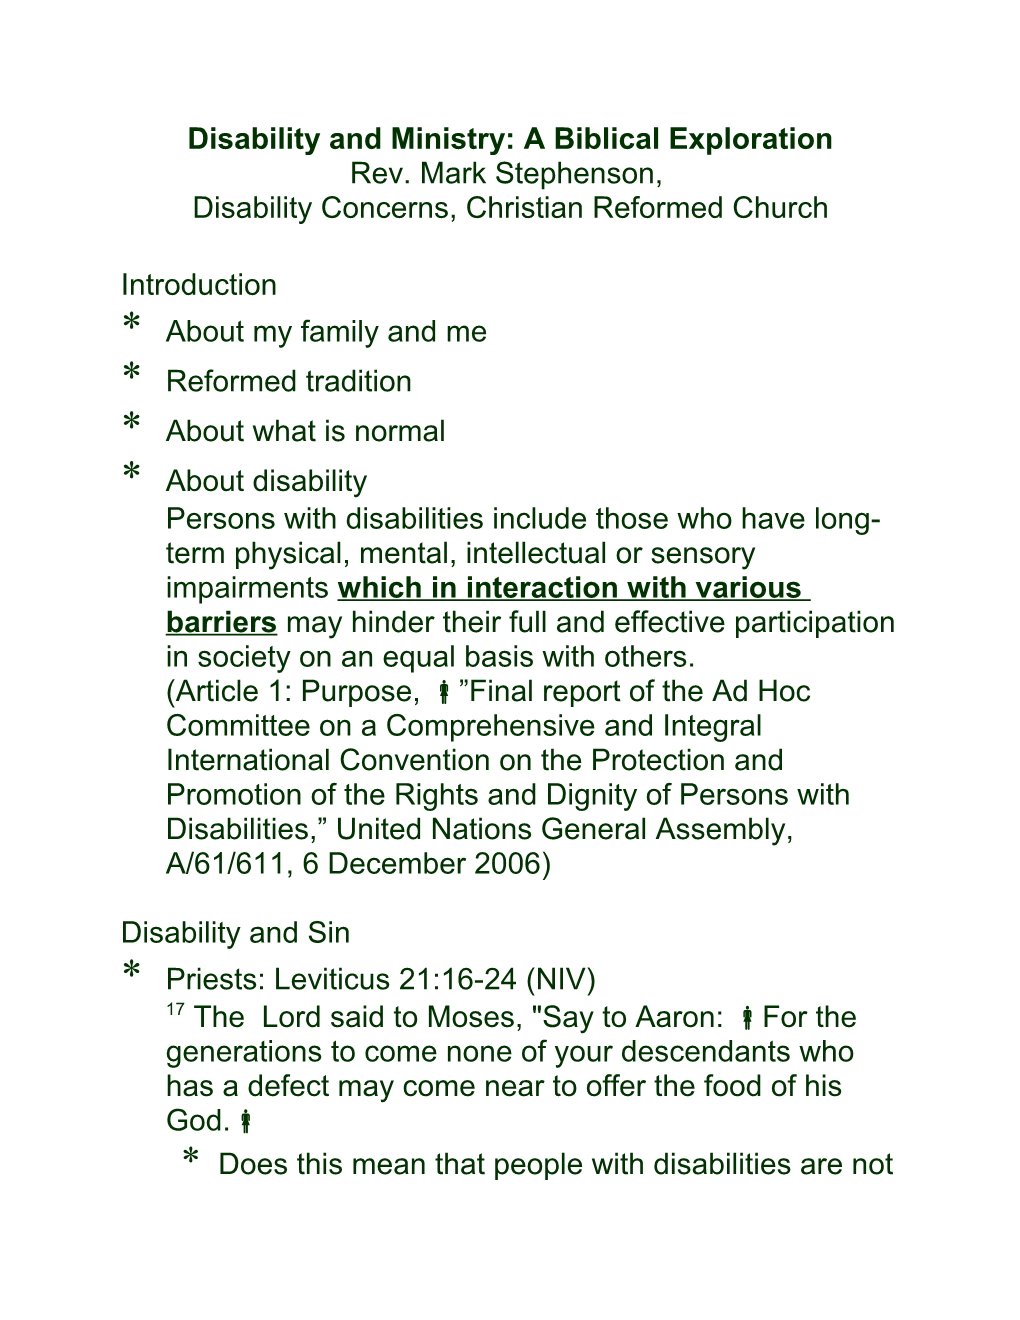 Disability and Ministry: a Biblical Exploration